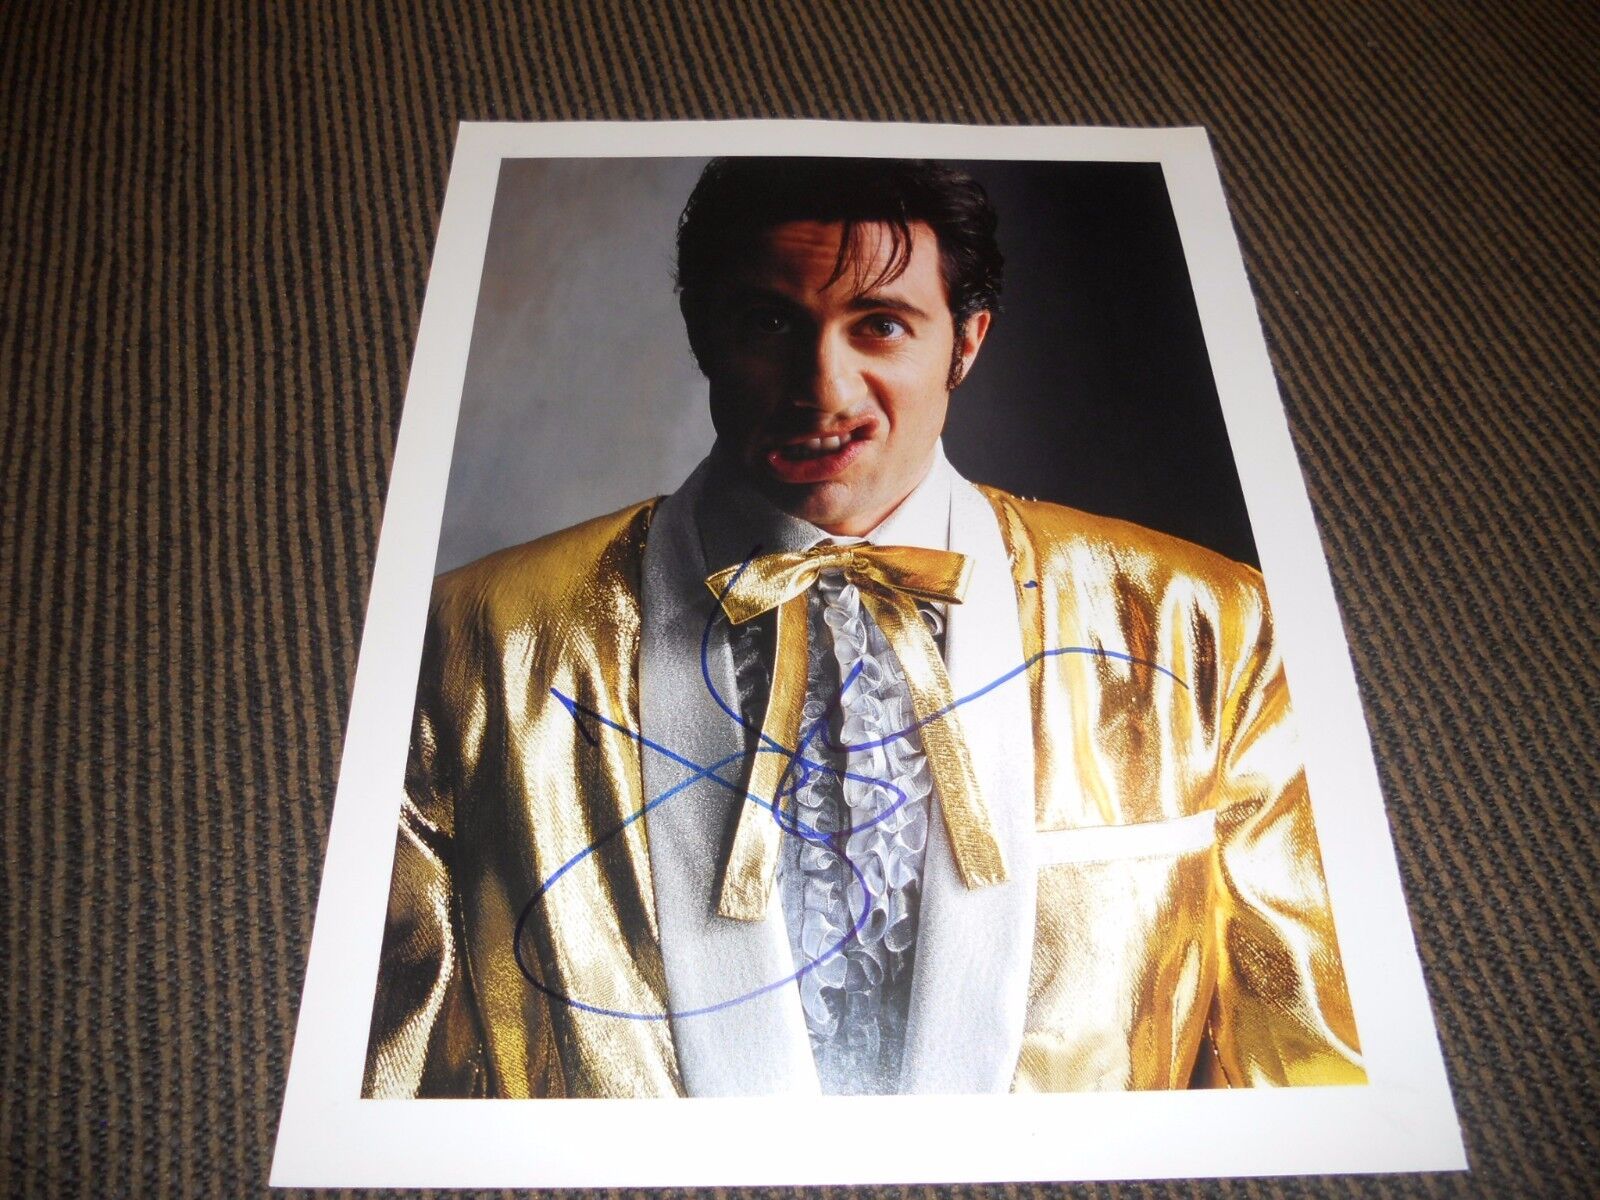 Jerry Seinfeld Signed Autographed Elvis 11x14 Magazine Photo Poster painting PSA Guaranteed F4